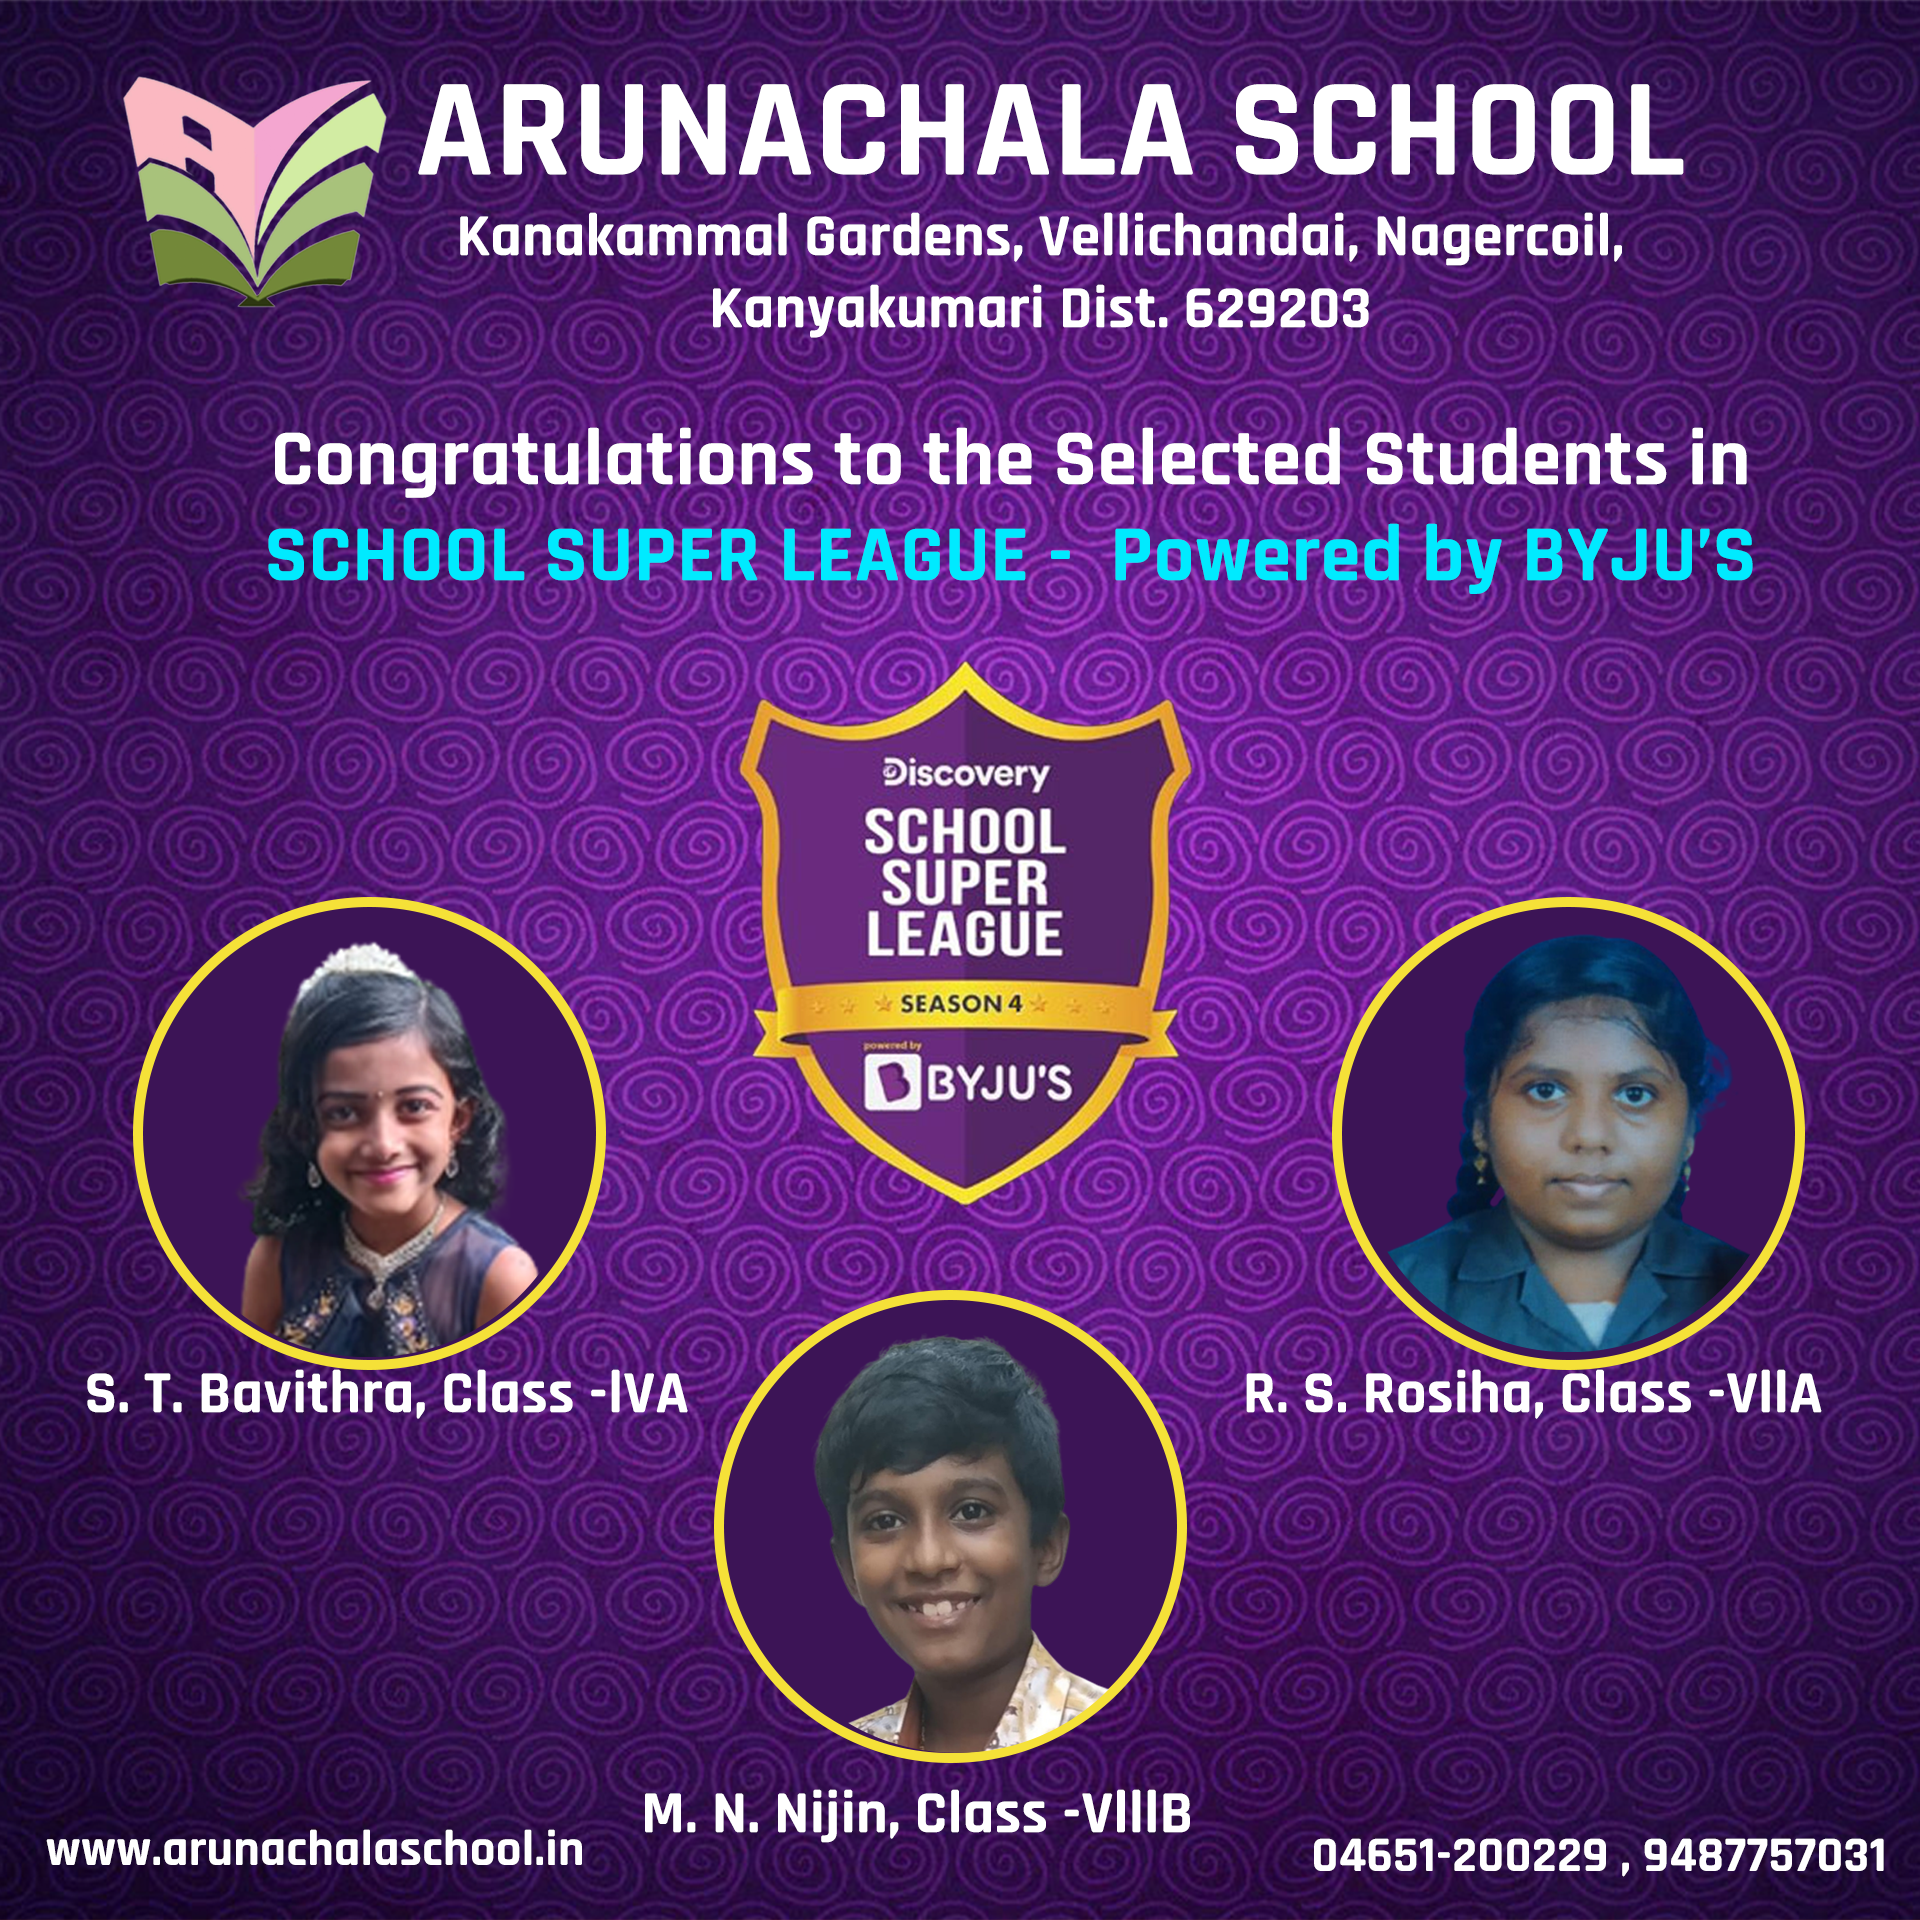 SCHOOL SUPER LEAGUE -  Powered by BYJU’S